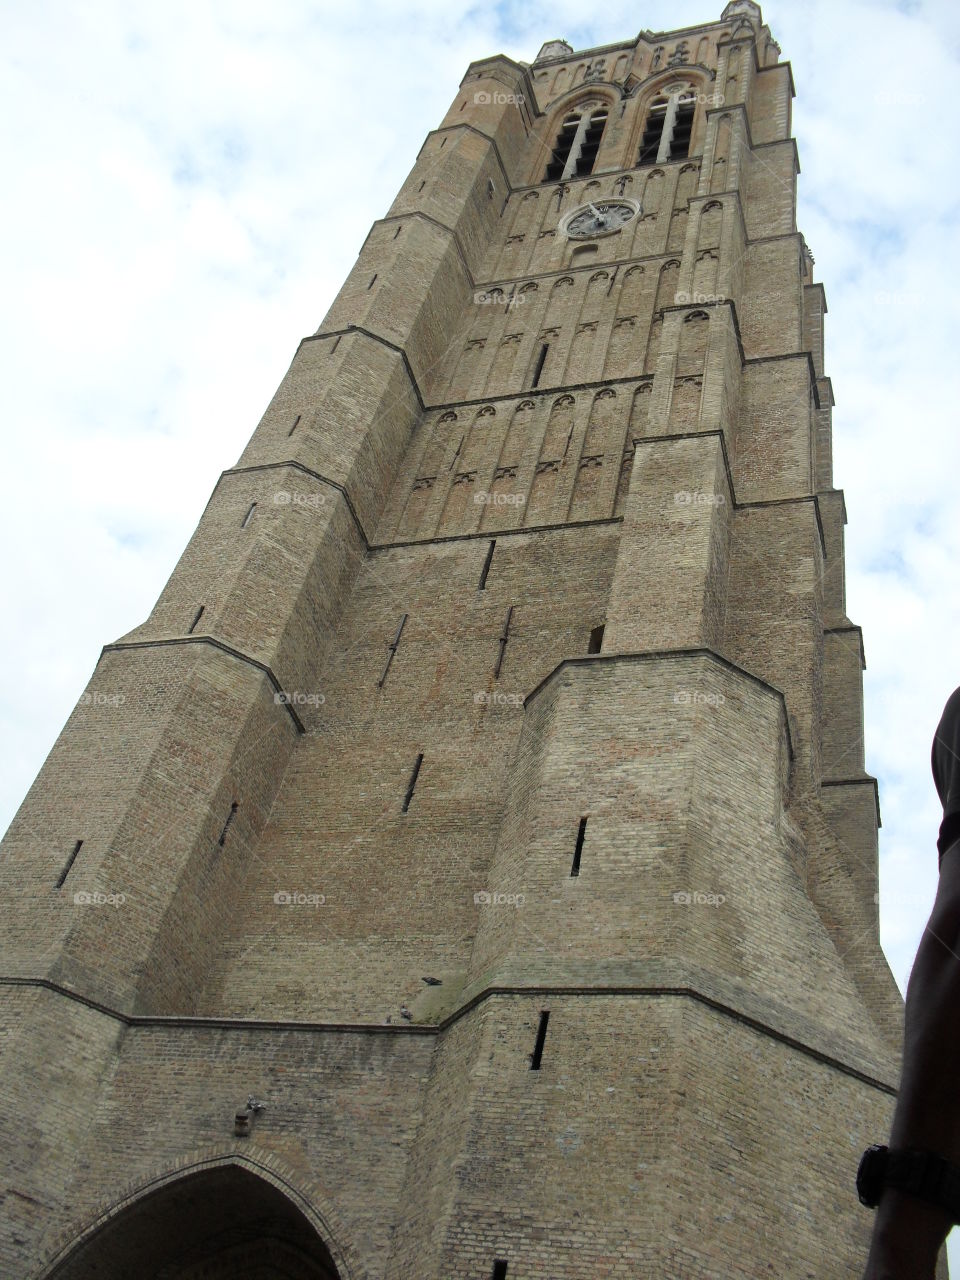 Dunkirk# France# Tower# Clock# ancient# Old#